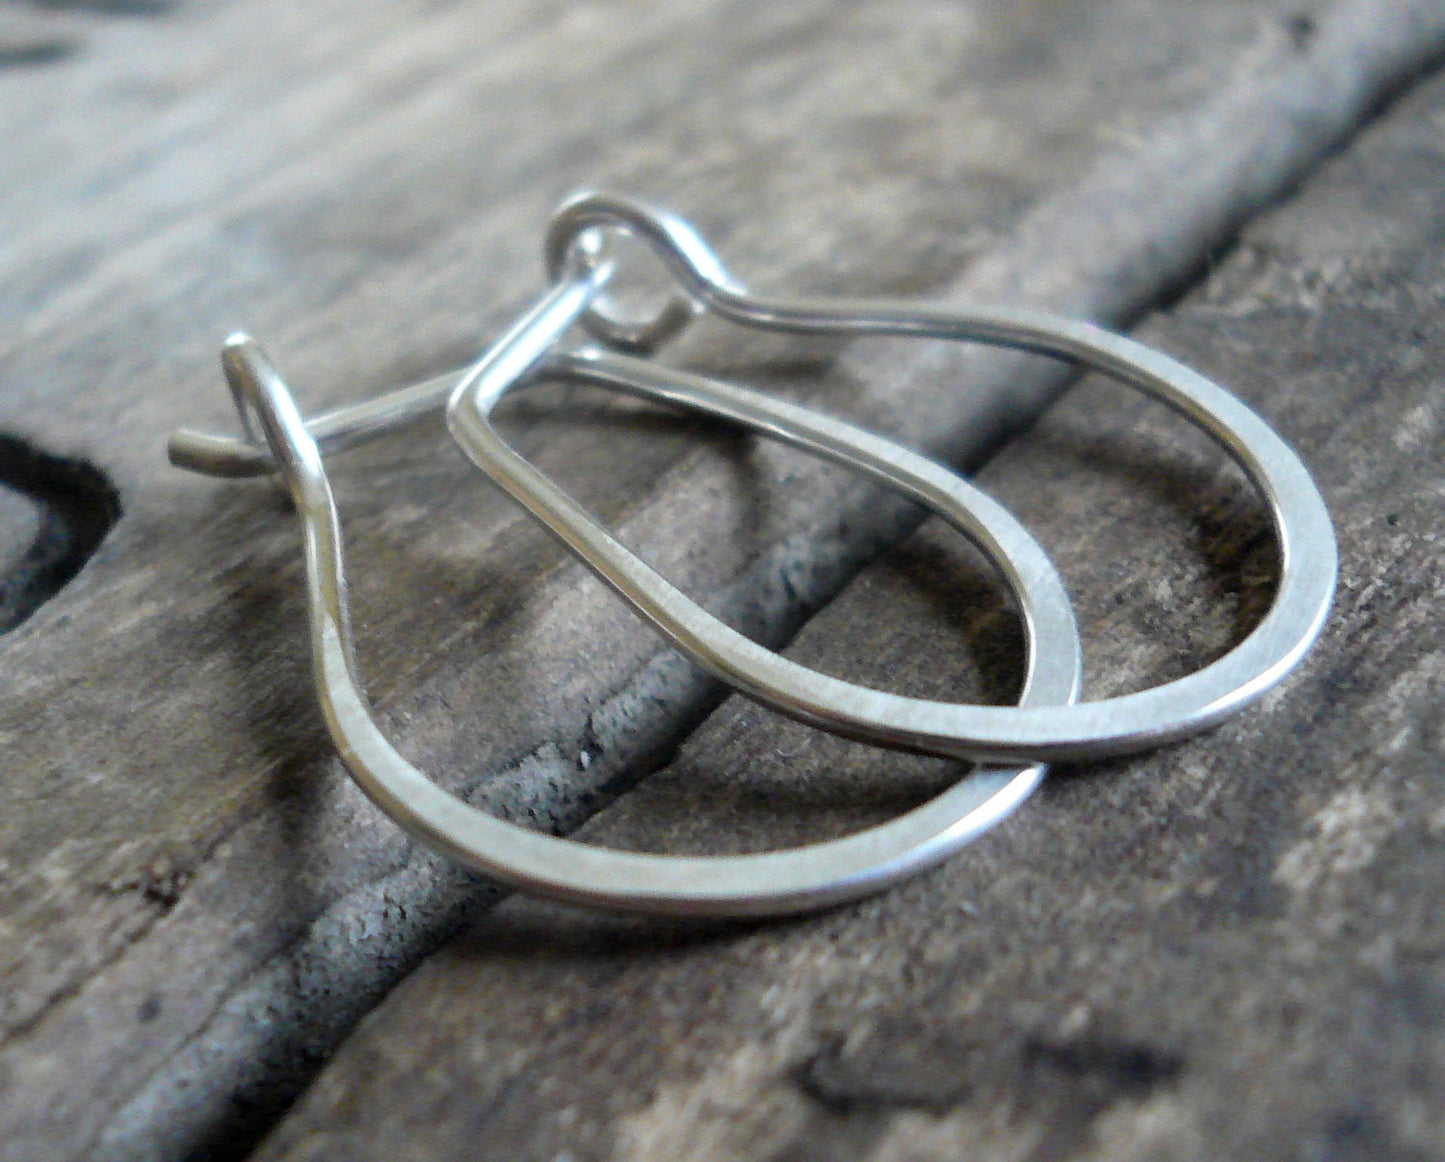 Pony Horseshoe Hoops - Handmade. Hand forged. Sterling Silver or 14kt goldfill Earrings